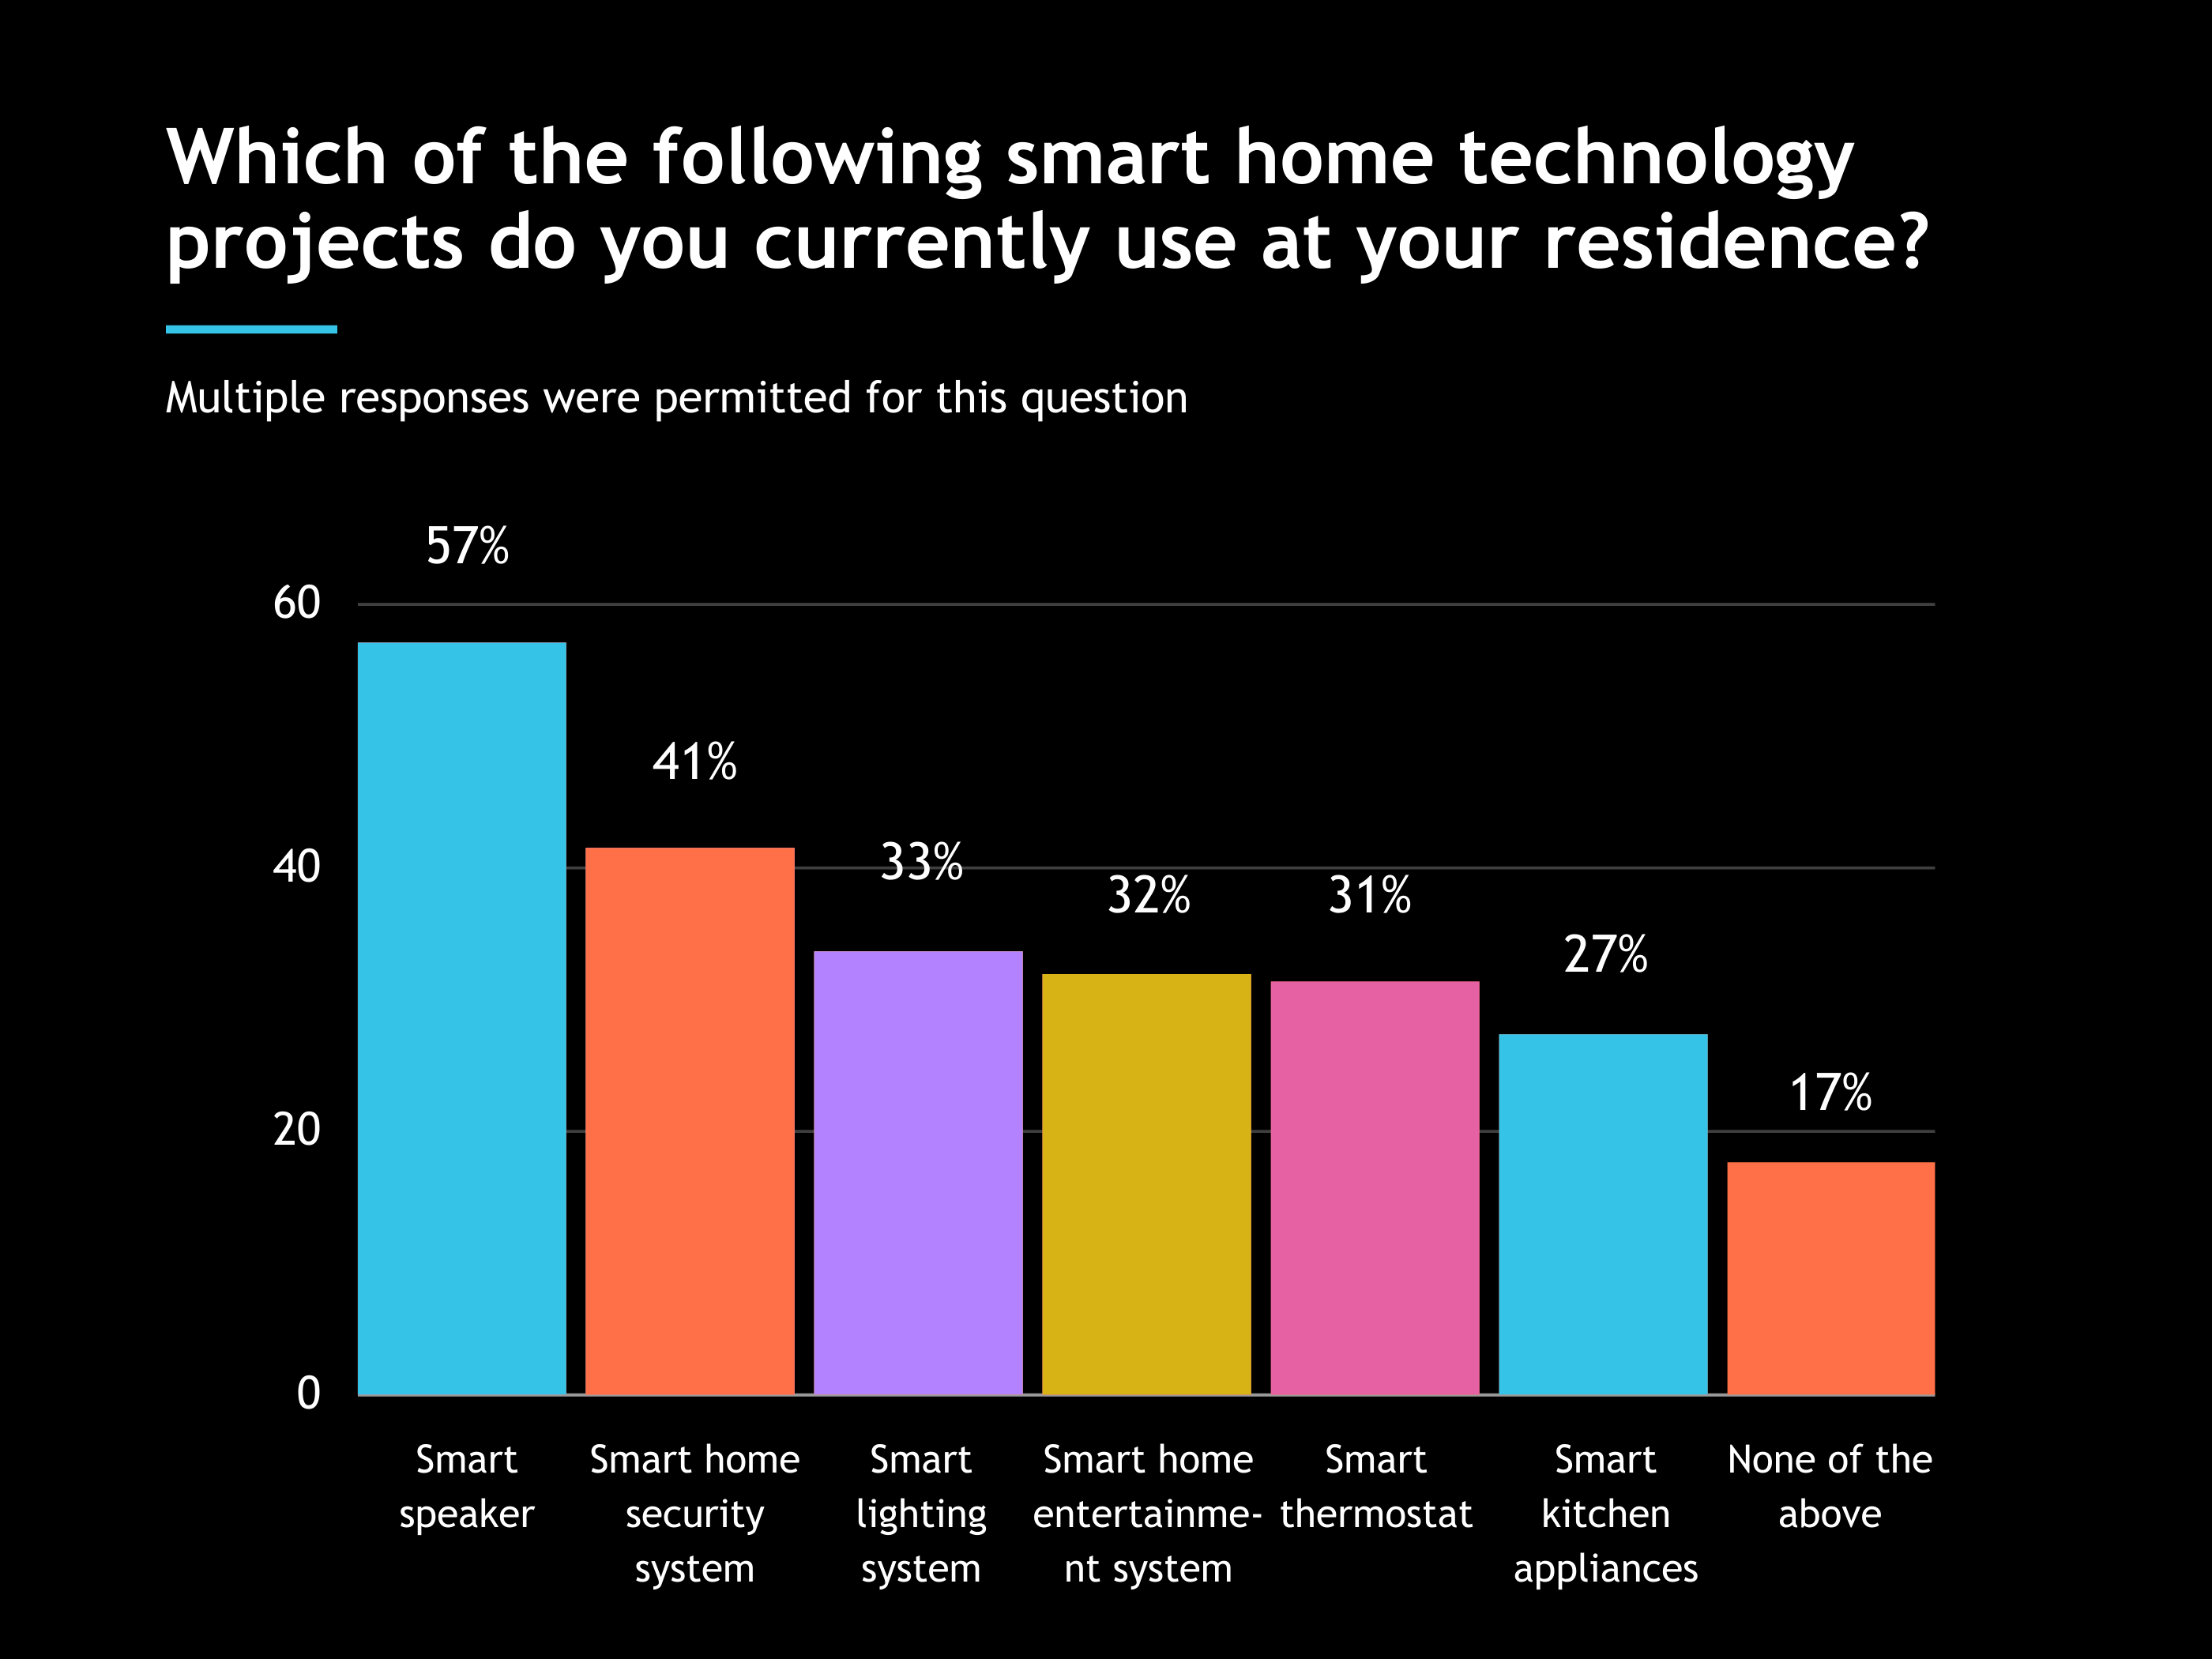 Which of the following smart home technology projects do you currently use at your residence?